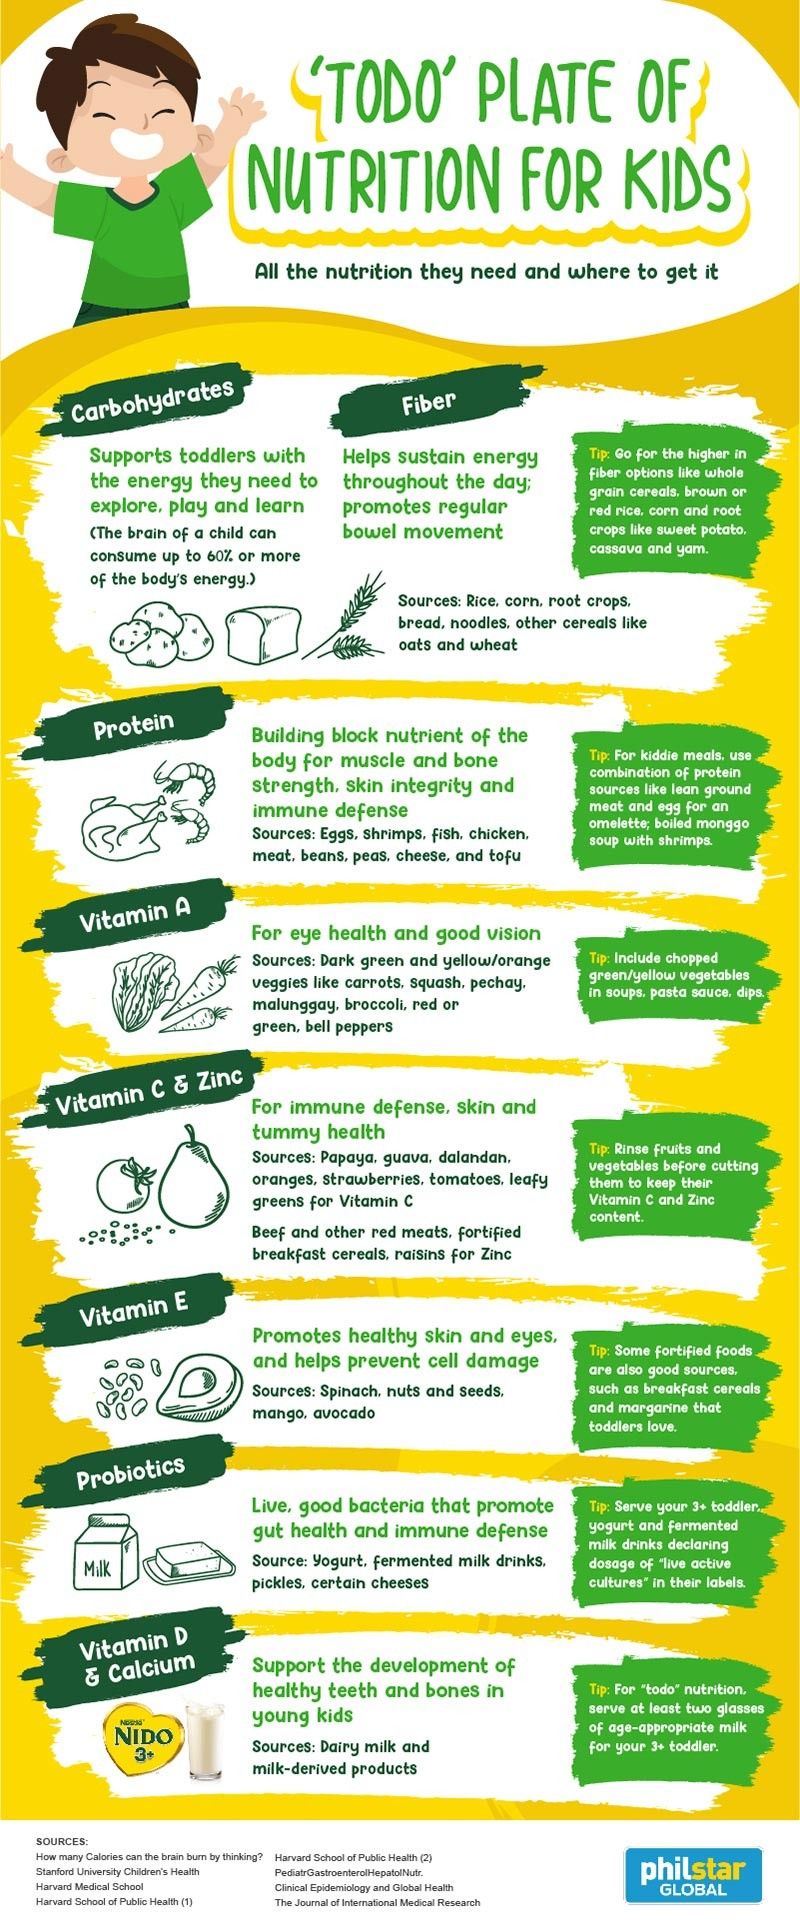 INFOGRAPHIC: Is your 3+ toddler getting ‘Todo’ nutrition for growth and protection? Here’s a helpful guide